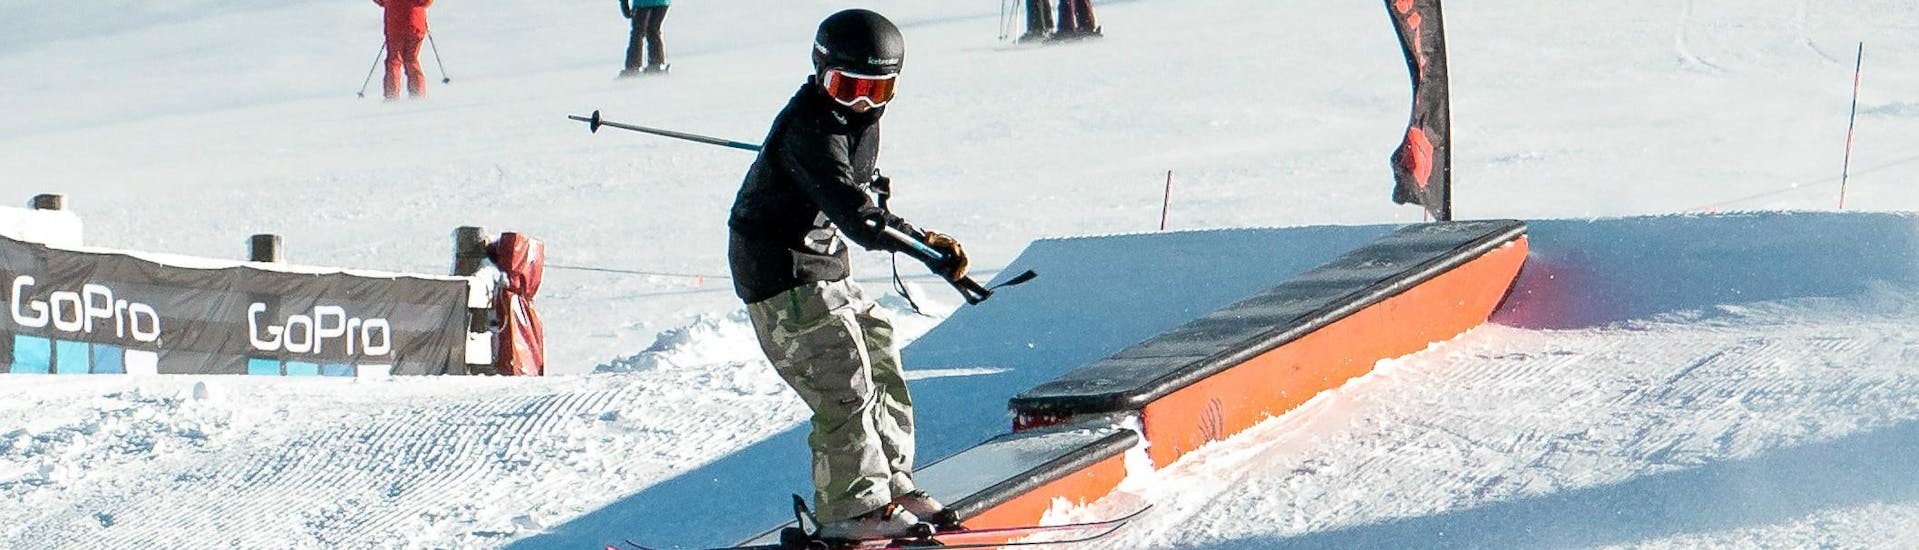 Kids Ski Lessons "Skiwees" (5-14 years) - With Transfer.